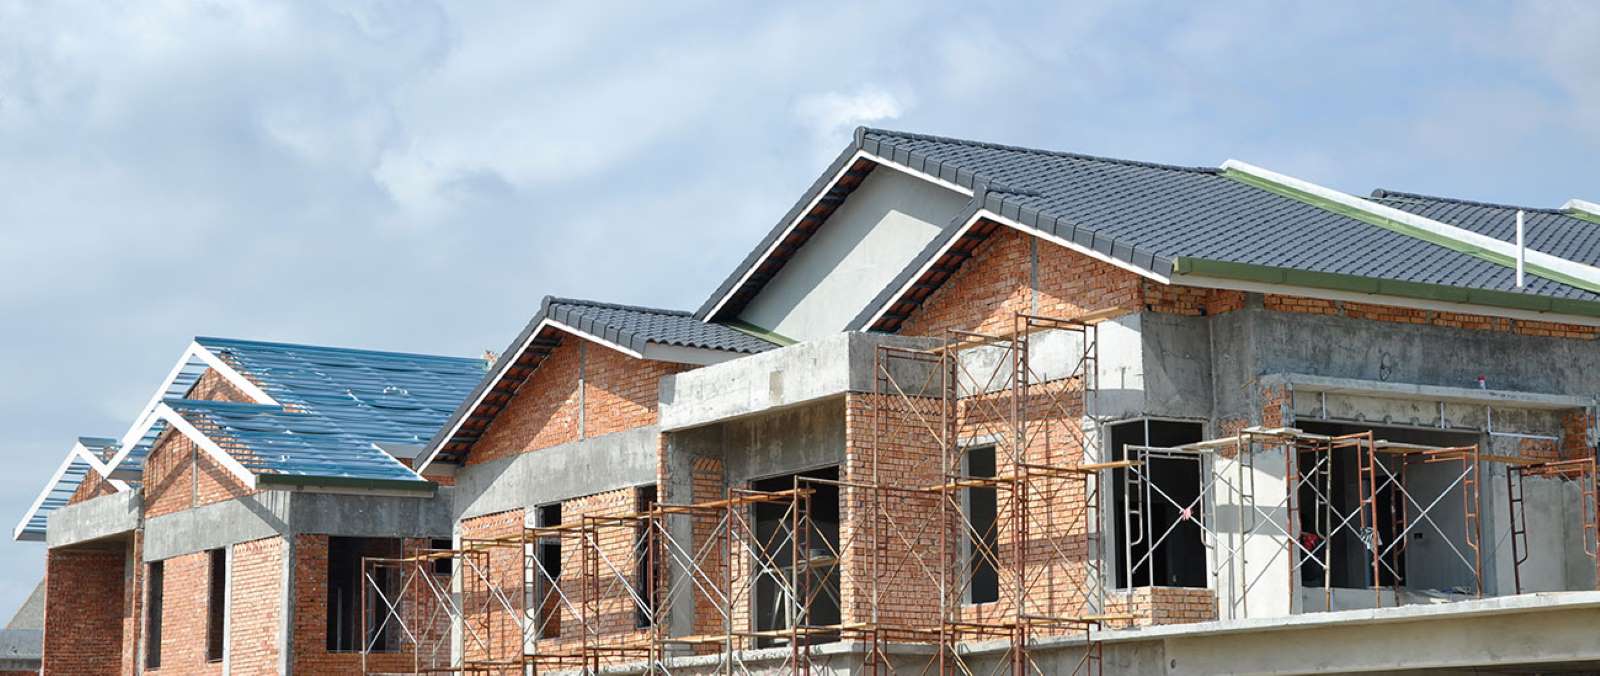 Services for property developers in Cumbria